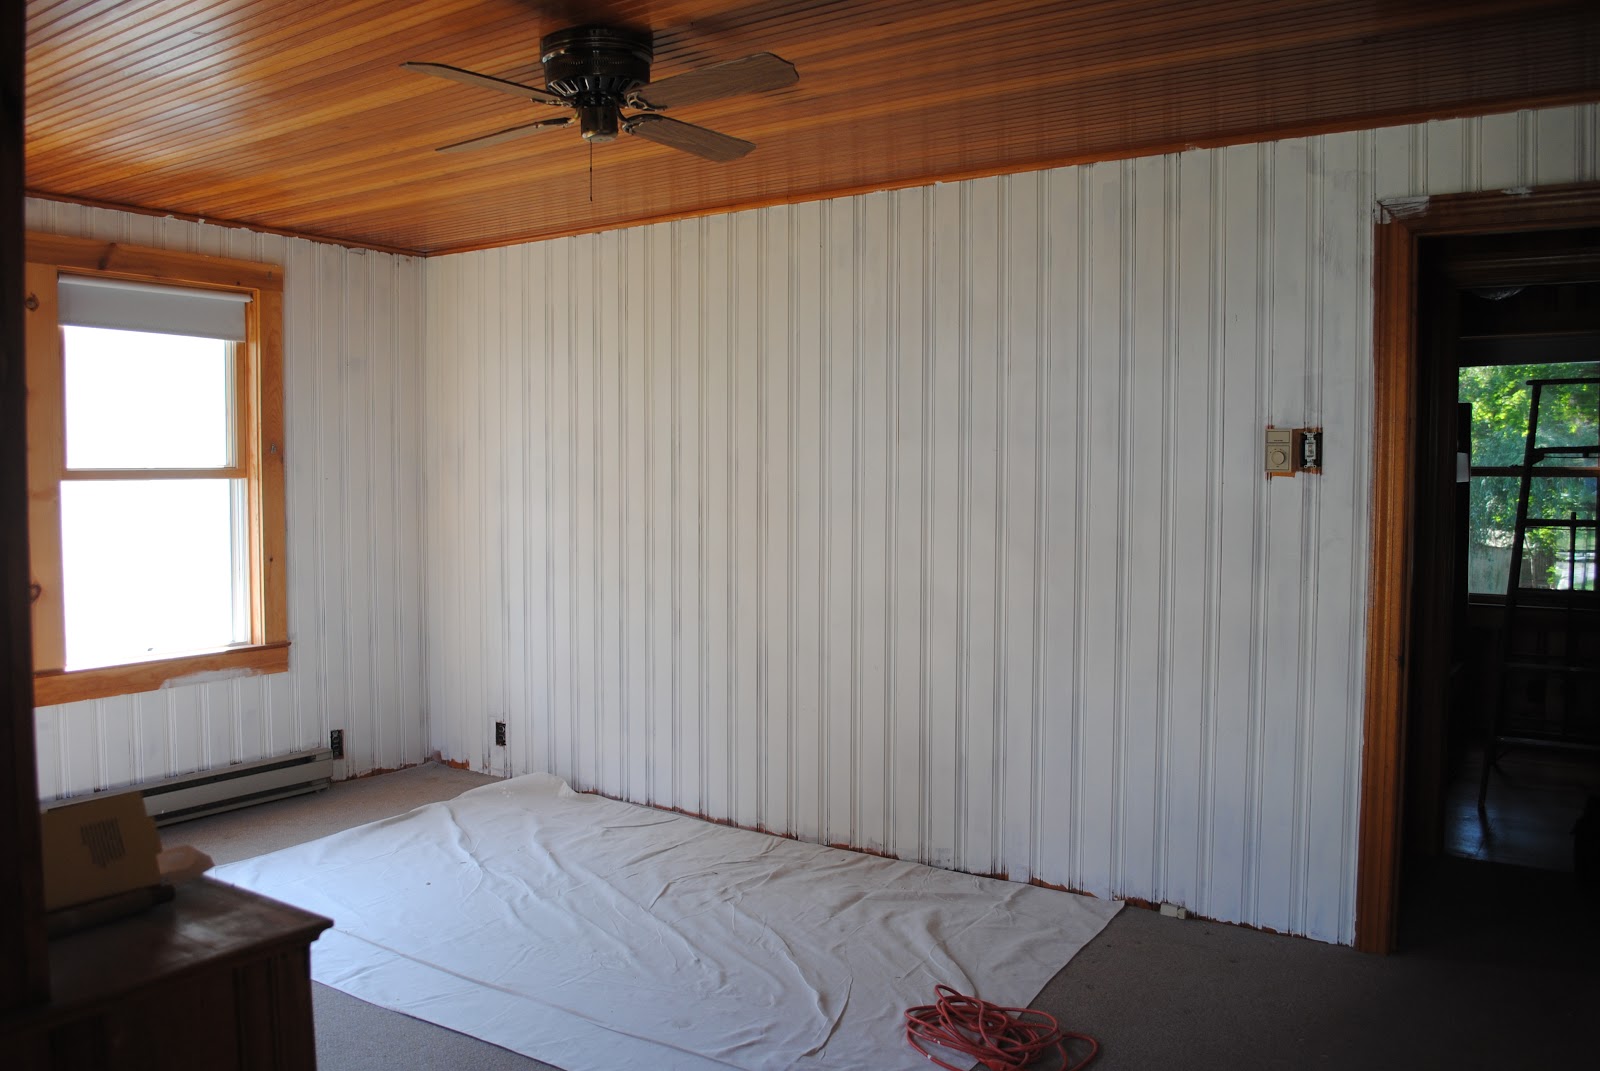 House By Holly To Paint Knotty Pine Or Not Paint Knotty Pine